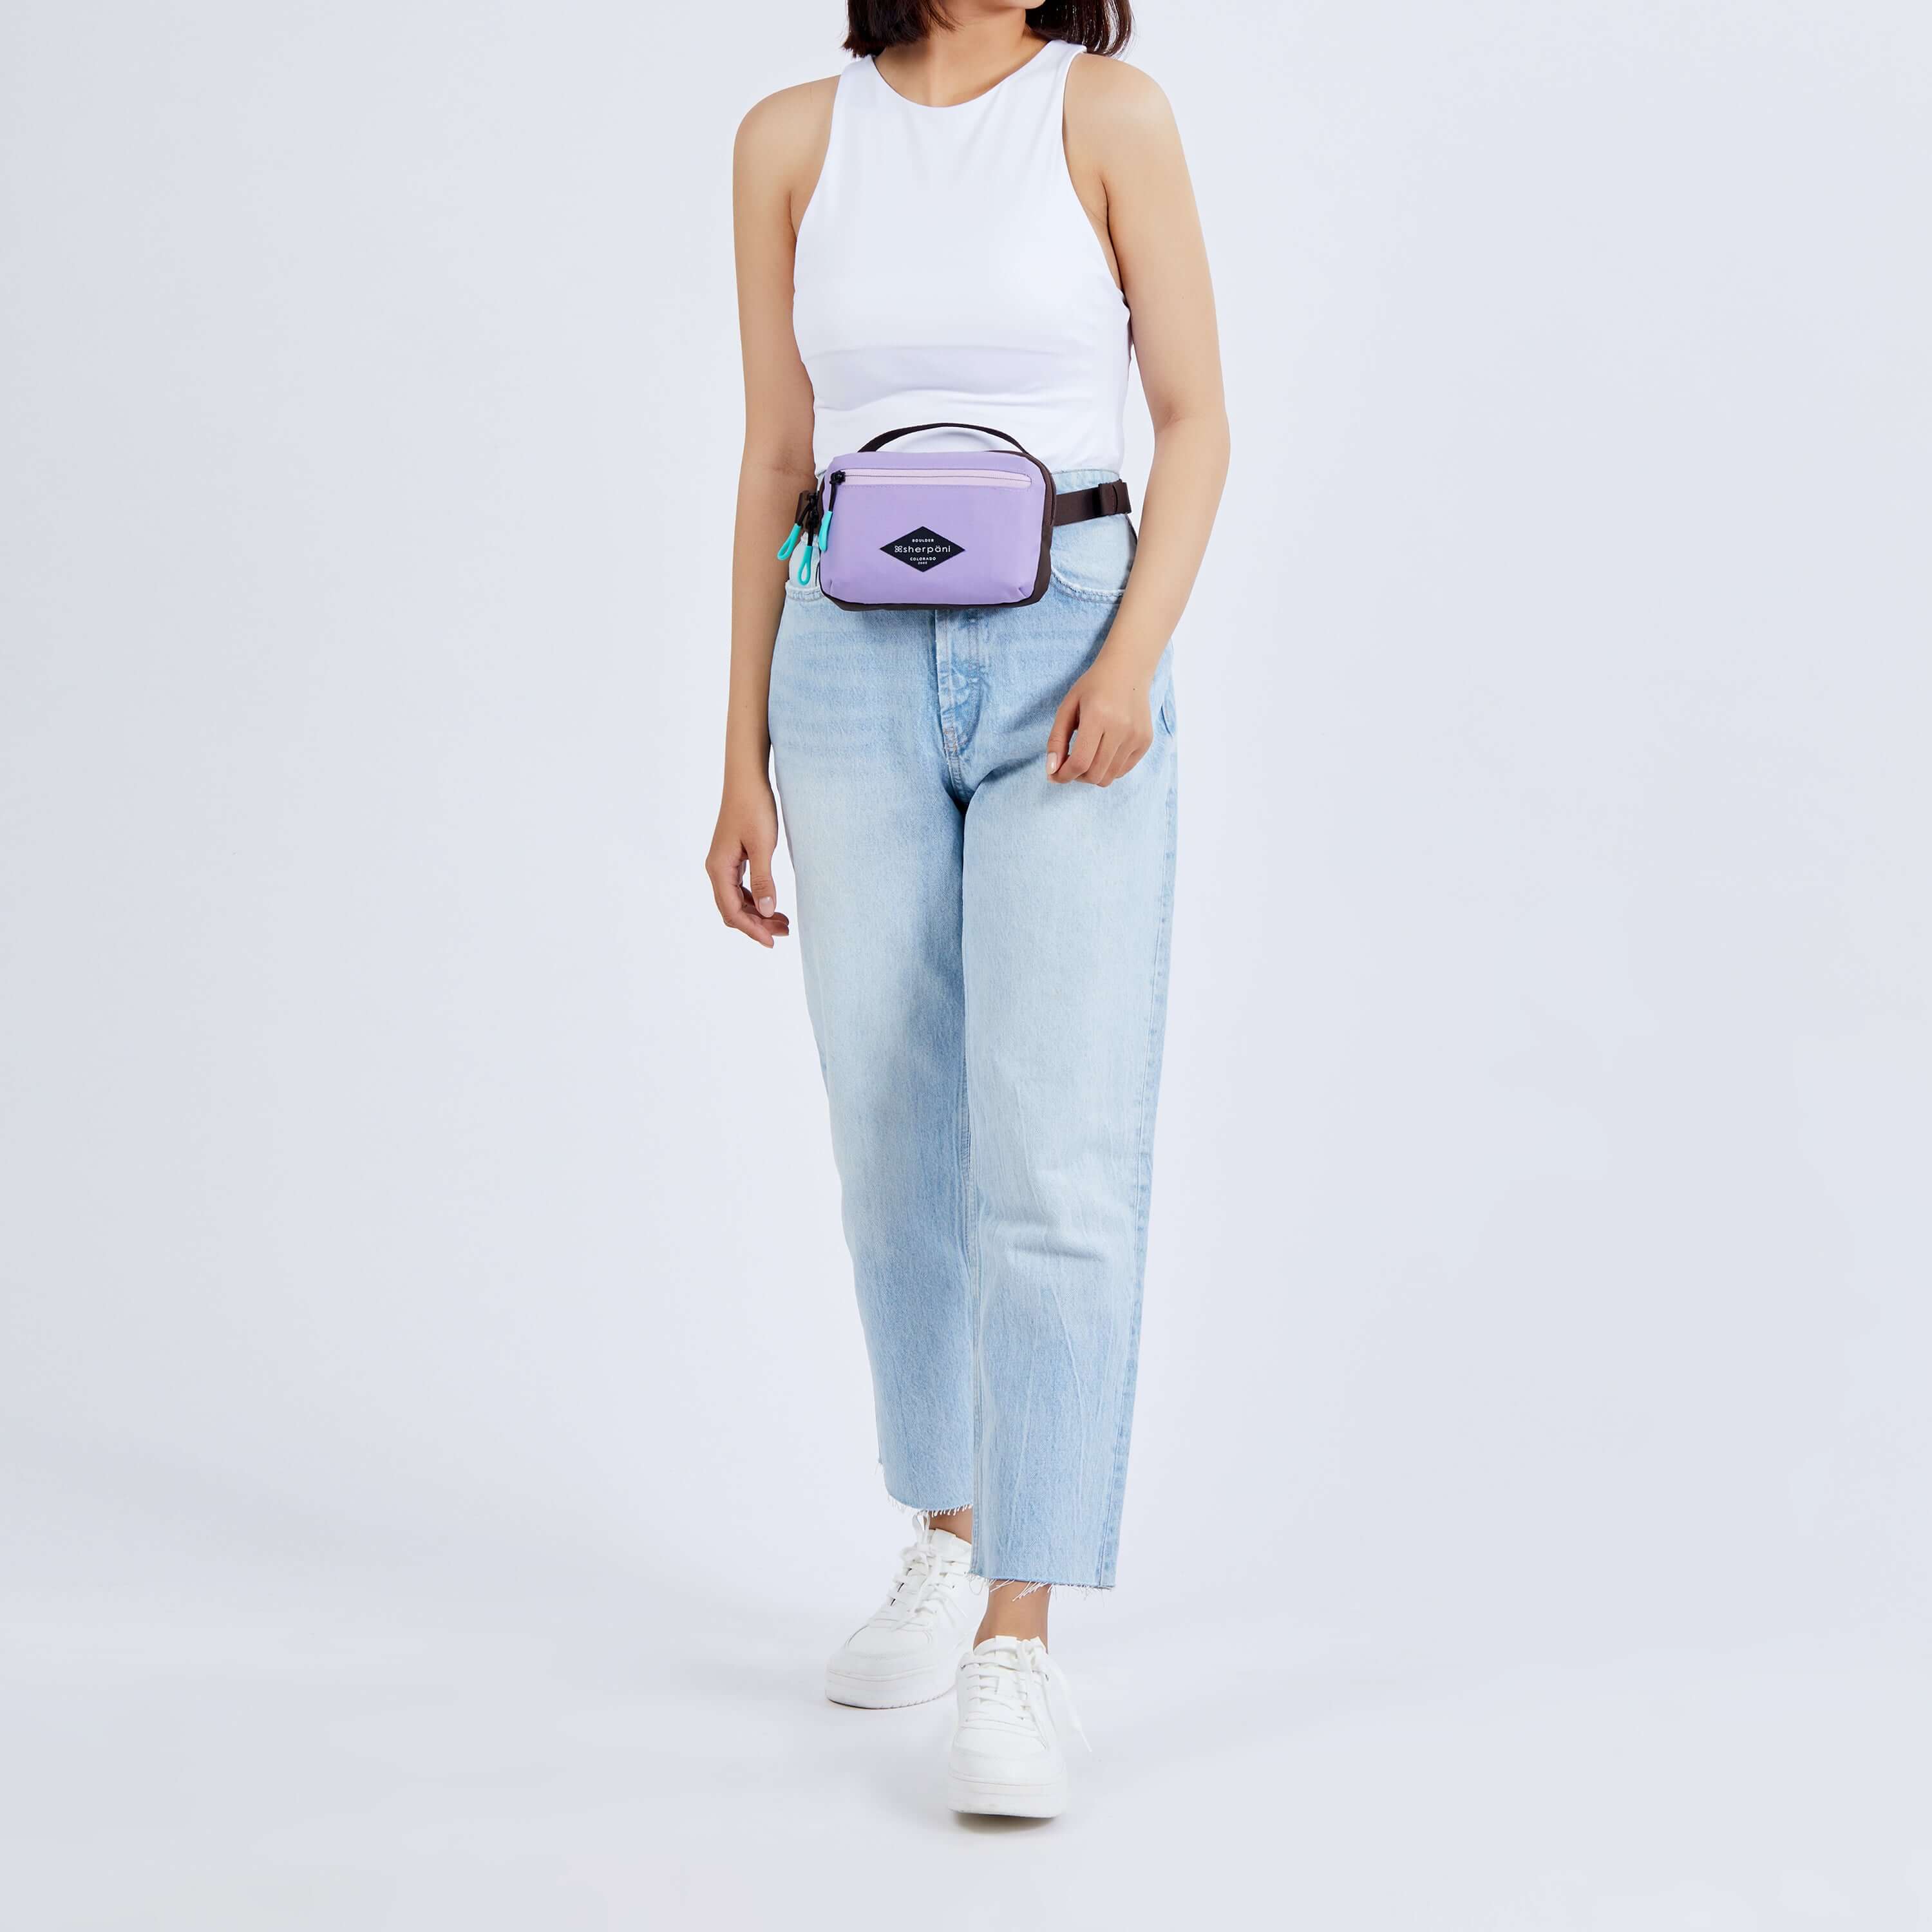 Close up view of a dark haired model. She is wearing a white tank top, jeans, white sneakers, and Sherpani's fanny pack, the Hyk in Lavender, as a fanny pack. 